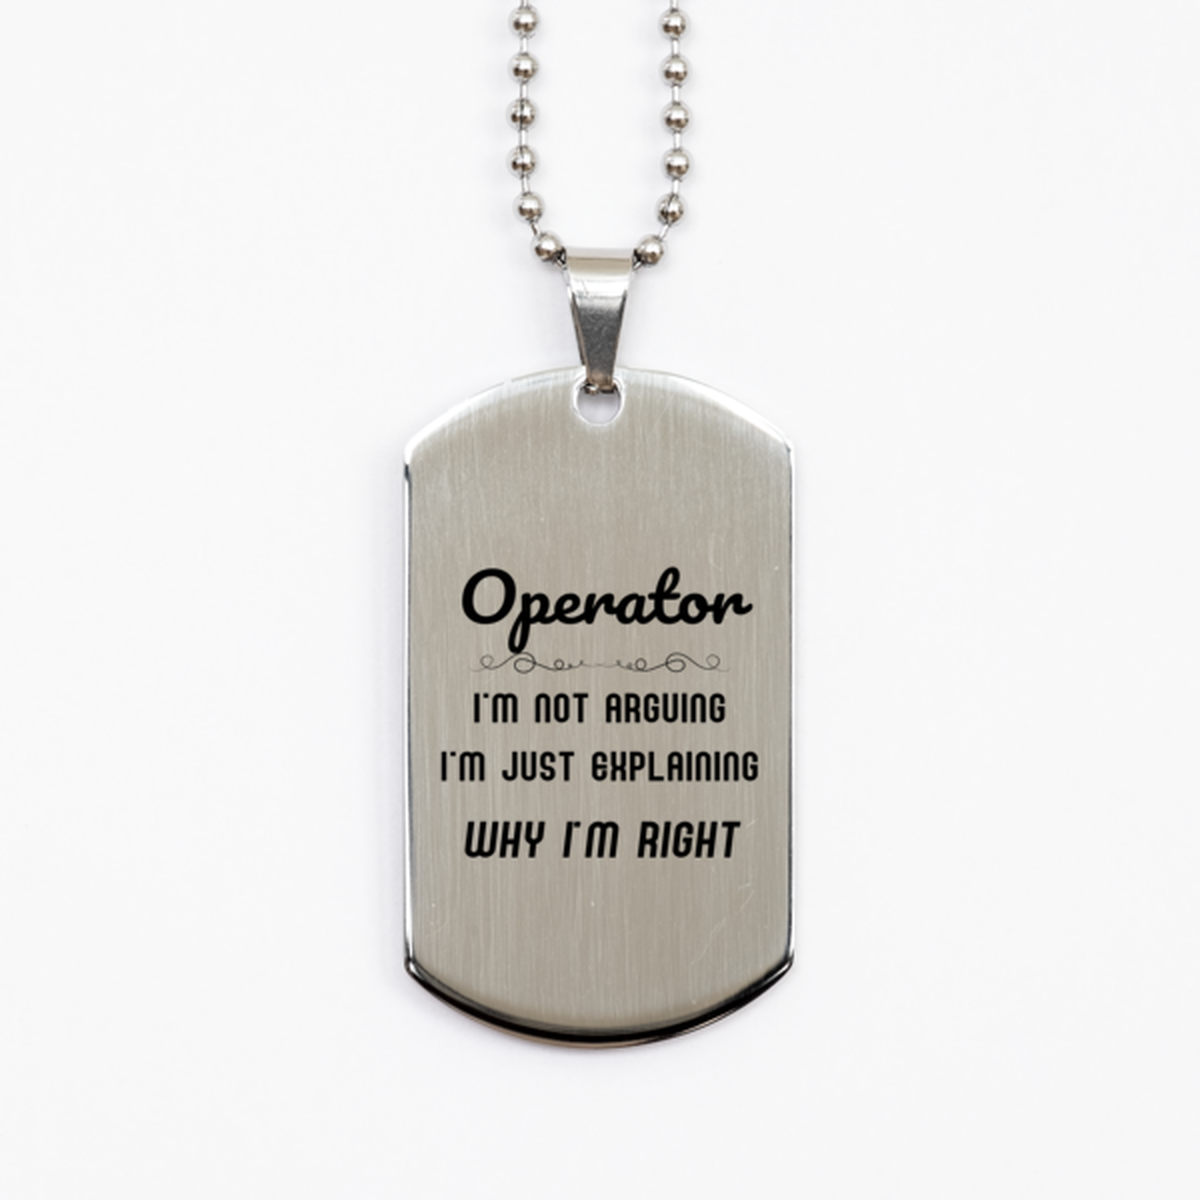 Operator I'm not Arguing. I'm Just Explaining Why I'm RIGHT Silver Dog Tag, Funny Saying Quote Operator Gifts For Operator Graduation Birthday Christmas Gifts for Men Women Coworker